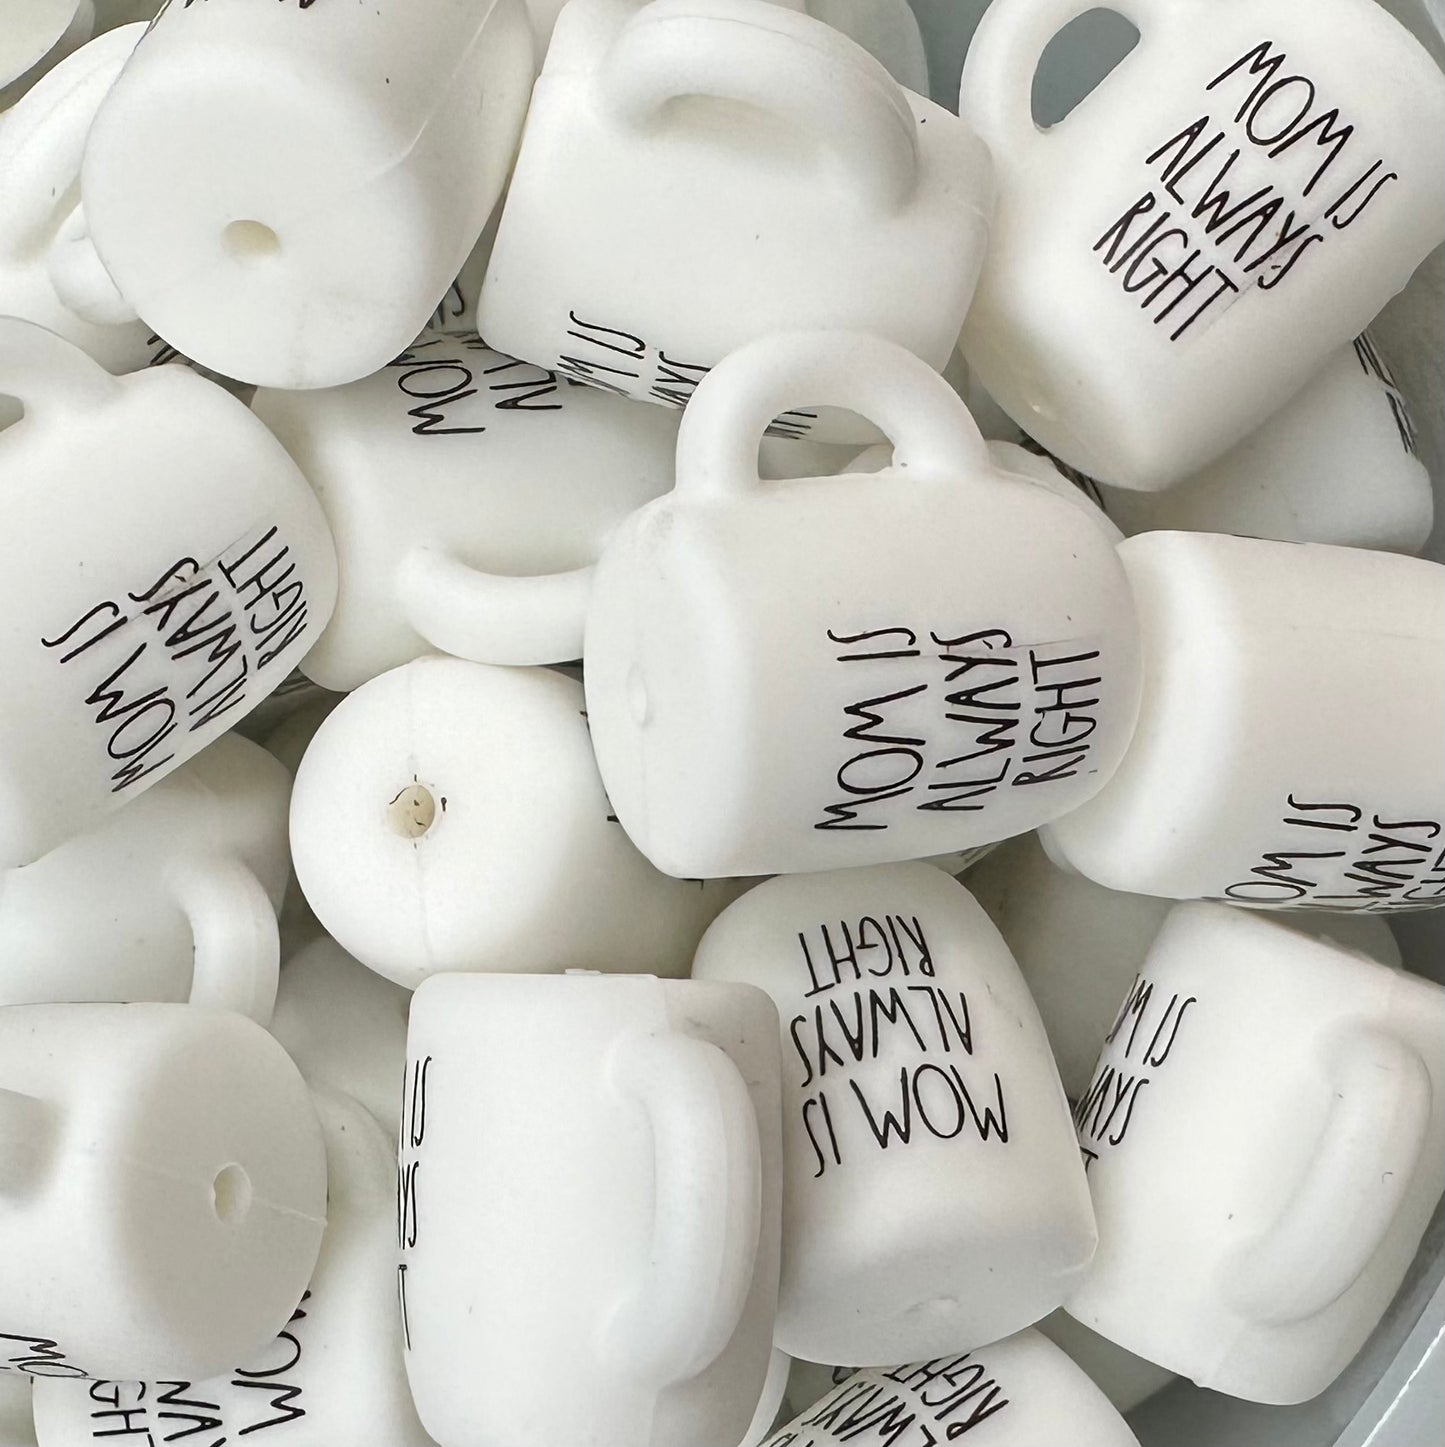 Focal Bead, Silicone Coffee Cup Bead, Mom is Always Right